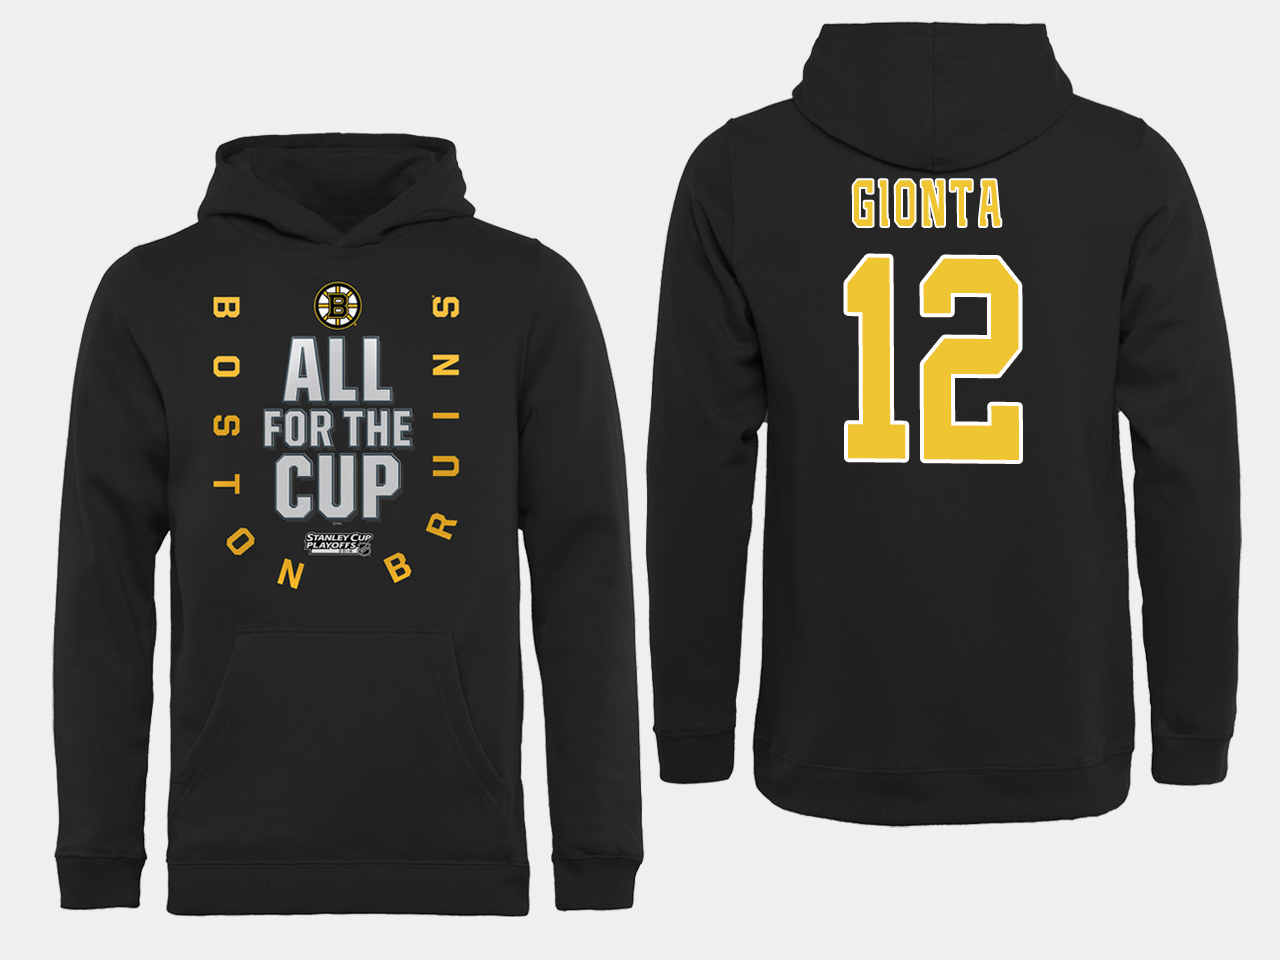 NHL Men Boston Bruins #12 Gionta Black All for the Cup Hoodie->boston bruins->NHL Jersey